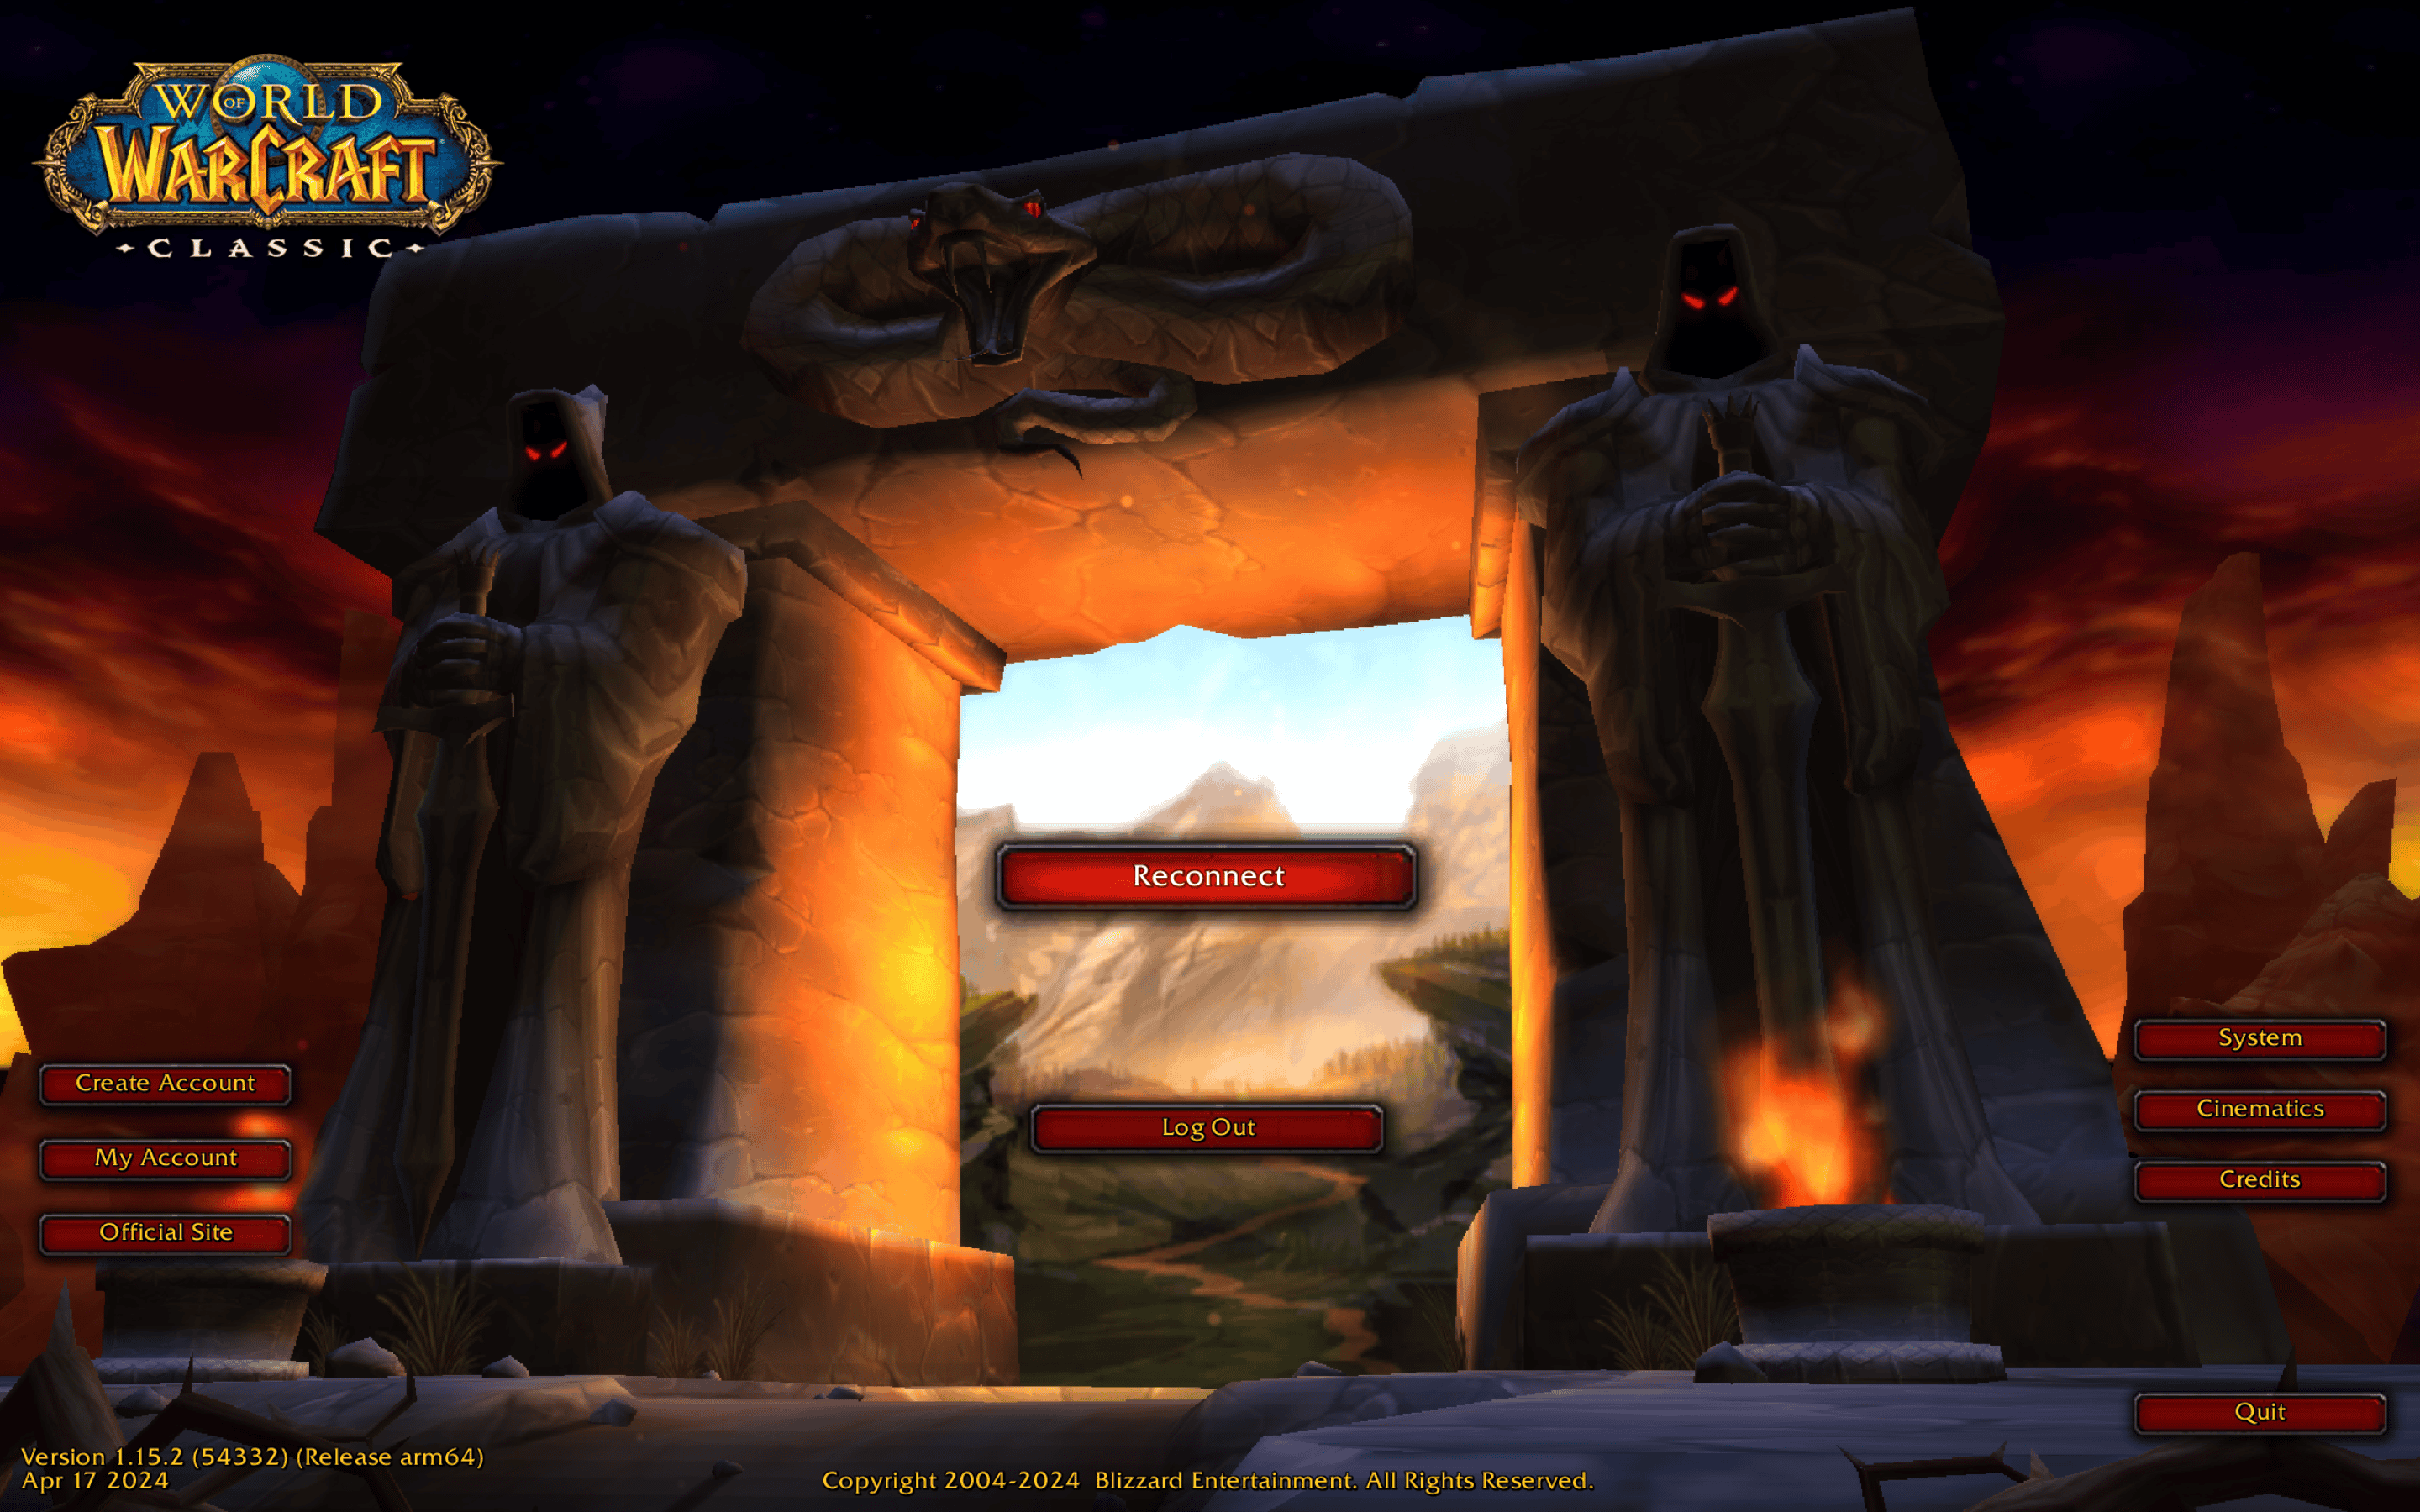 World of warcraft classic - the login screen for WoW